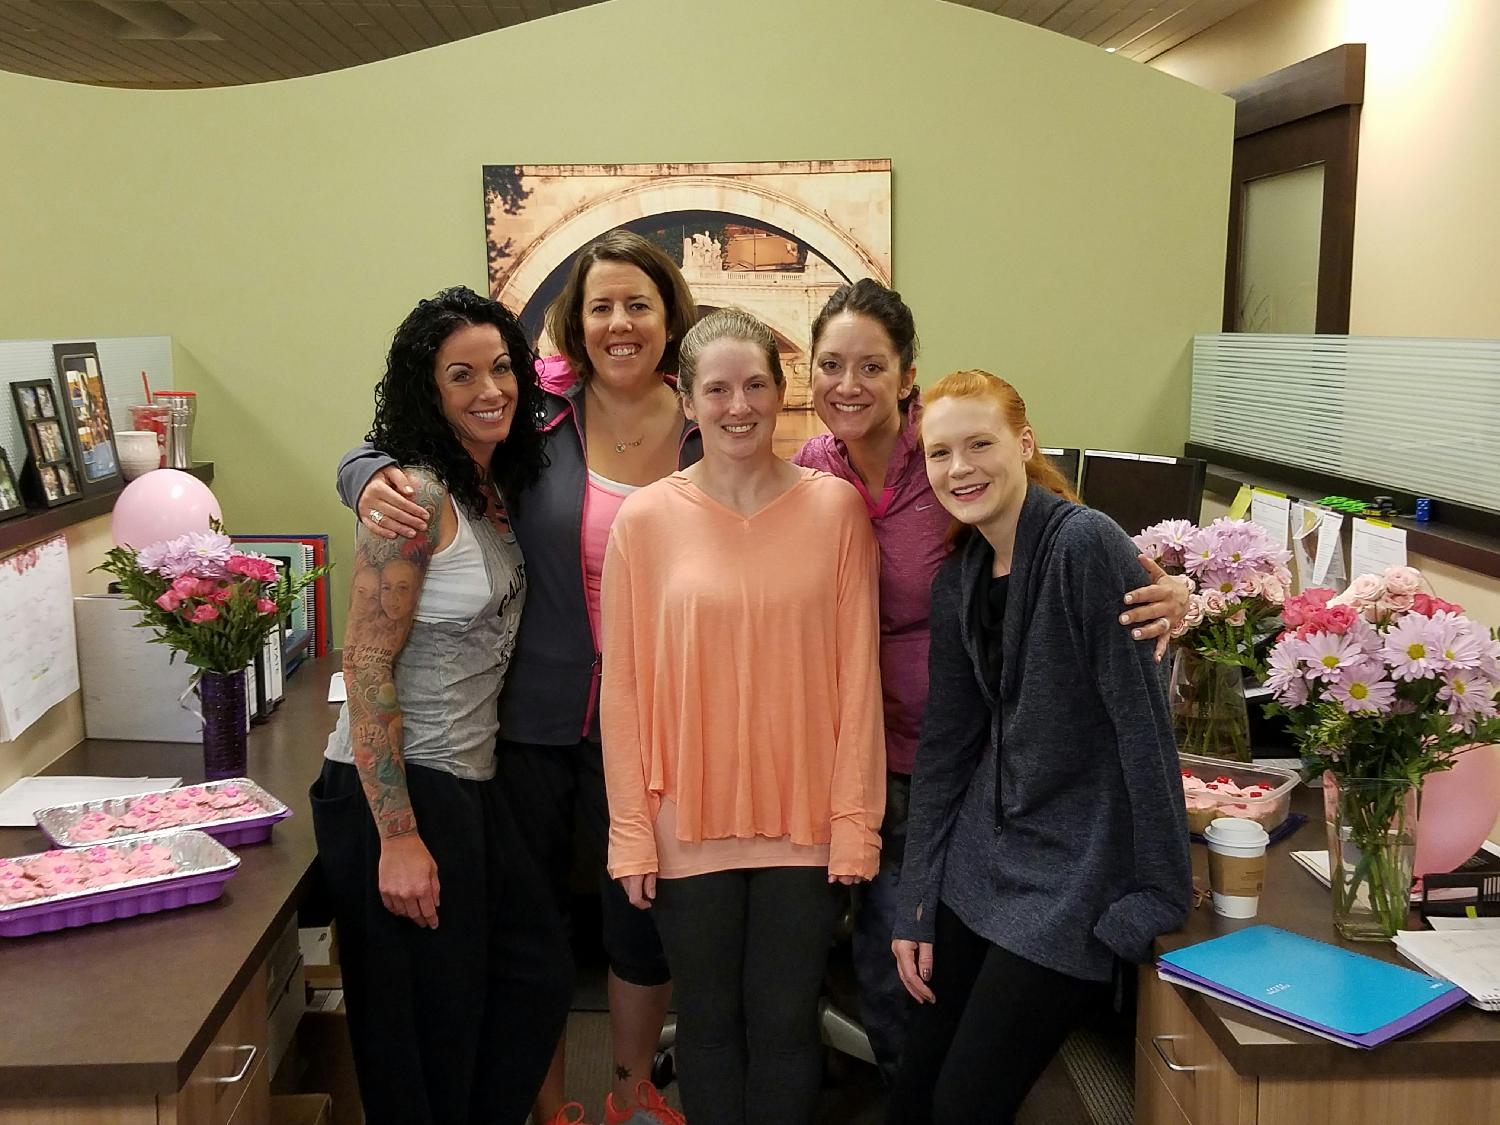 Interwest Pink Party to help support a co-worker diagnosed with breast cancer